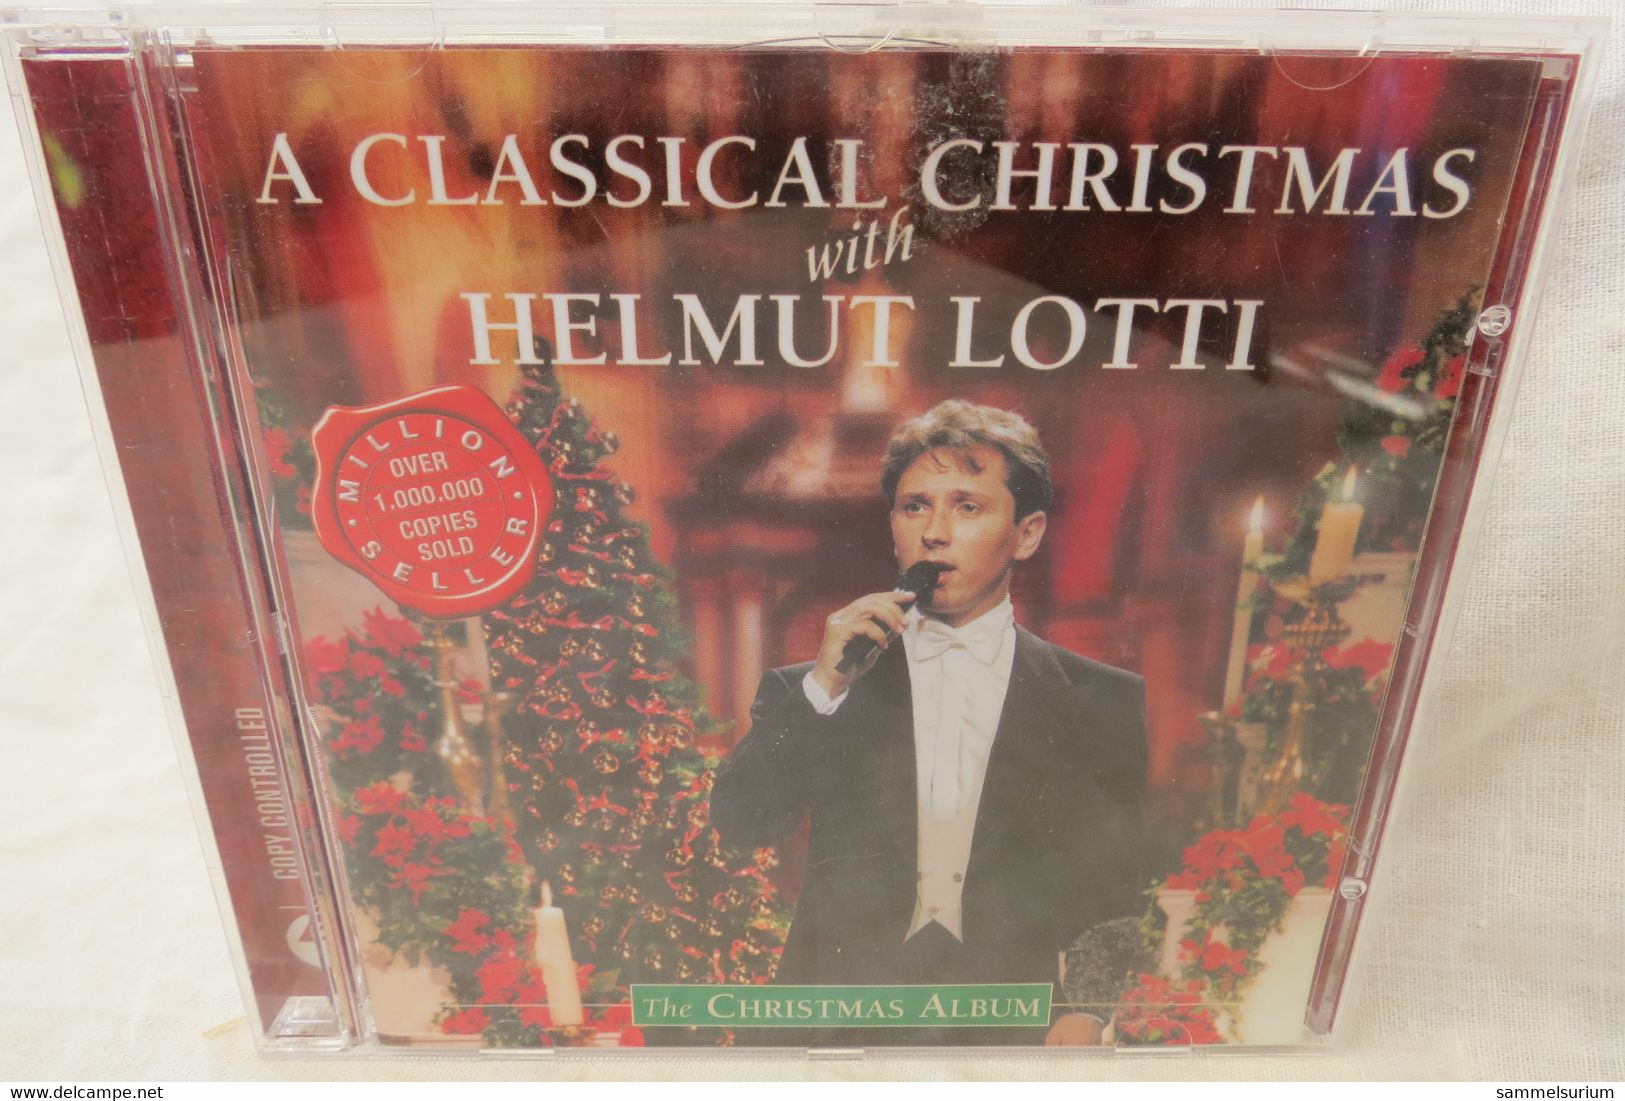 CD Helmut Lotti "A Classical Christmas With Helmut Lotti" The Christmas Album - Christmas Carols